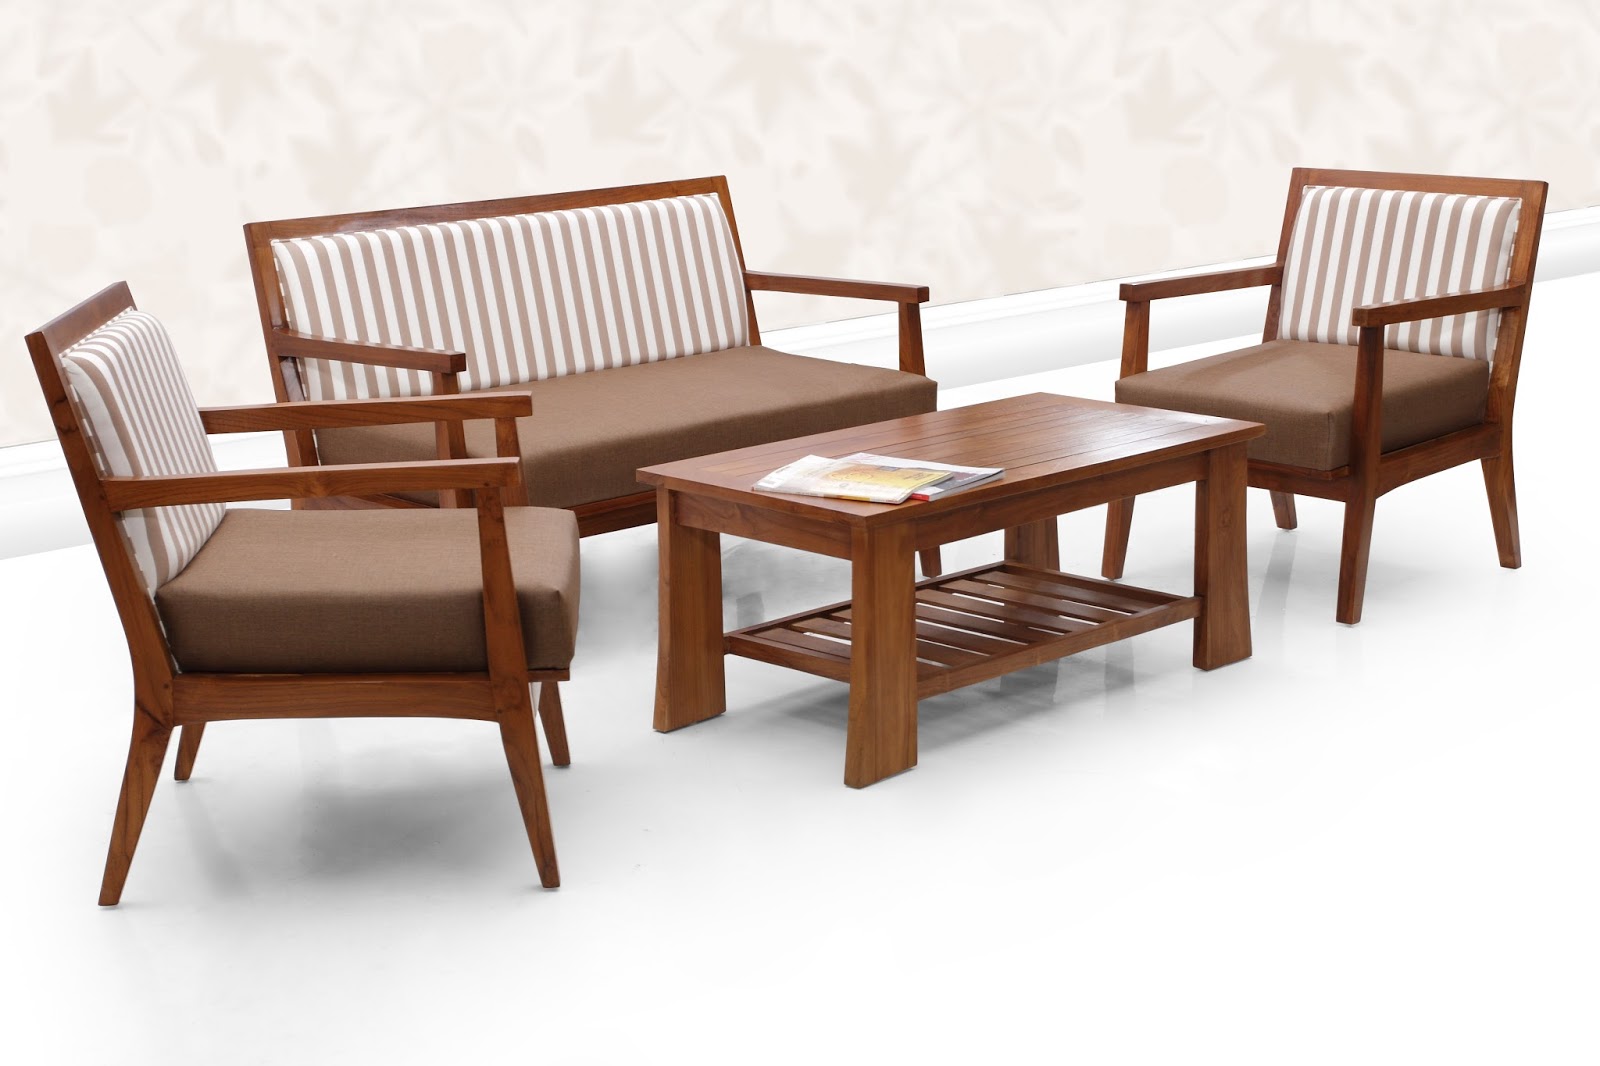 Indonesia Teak Furniture: A Timeless Choice For Modern Homes